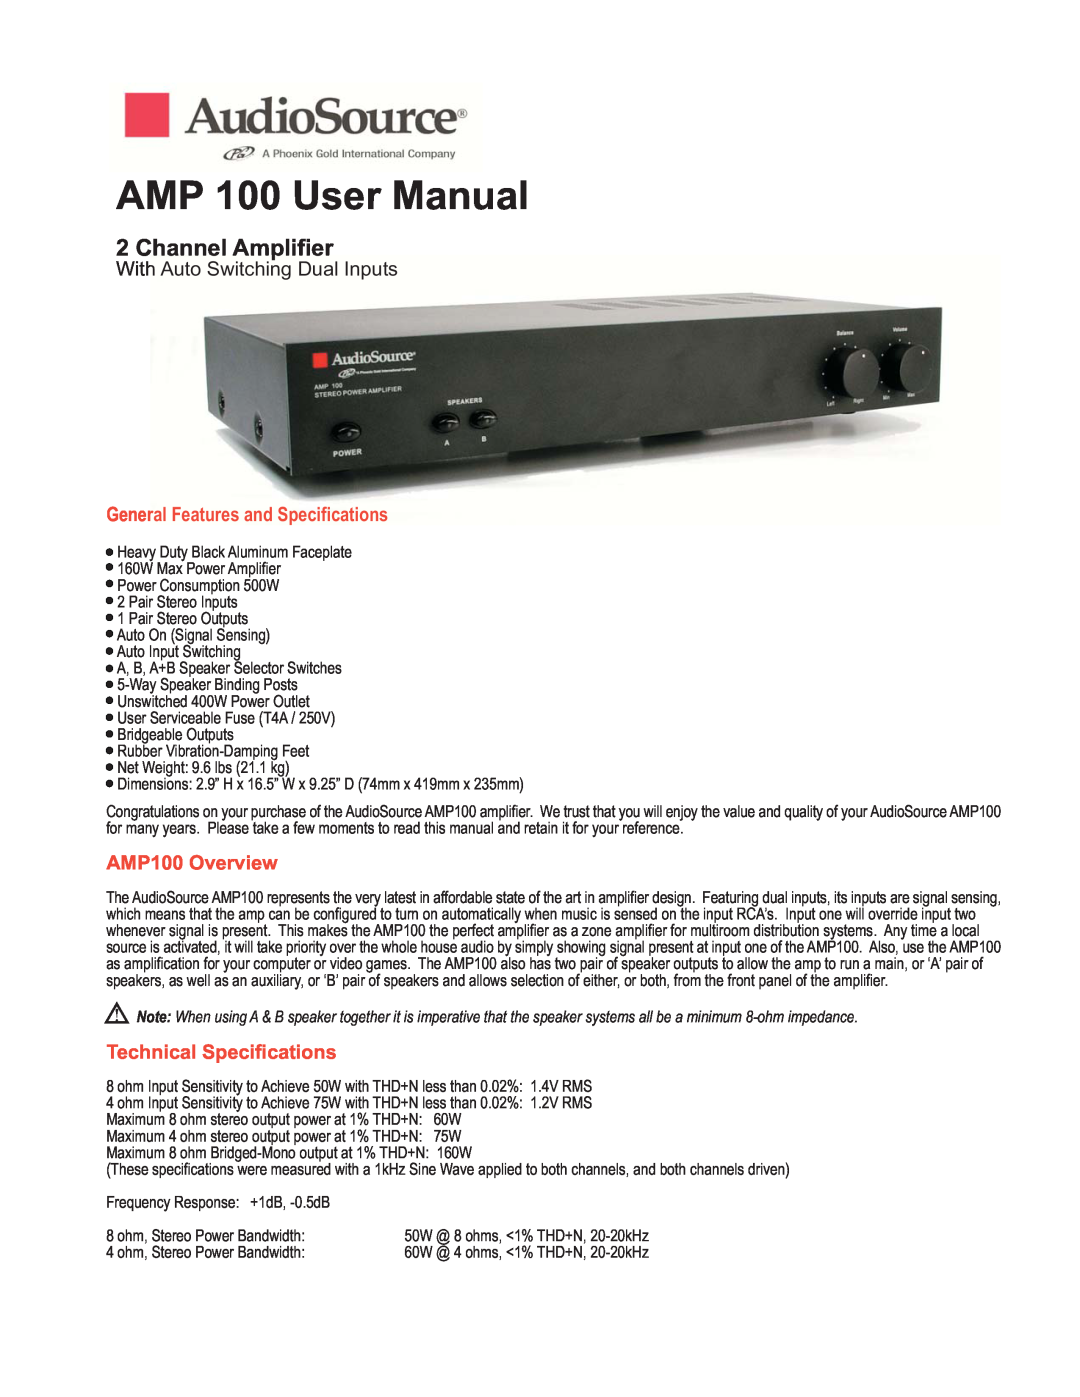 AudioSource 2 Channel Amplifier With Auto Switching Dual Inputs, AMP 100 technical specifications AMP100 Overview 